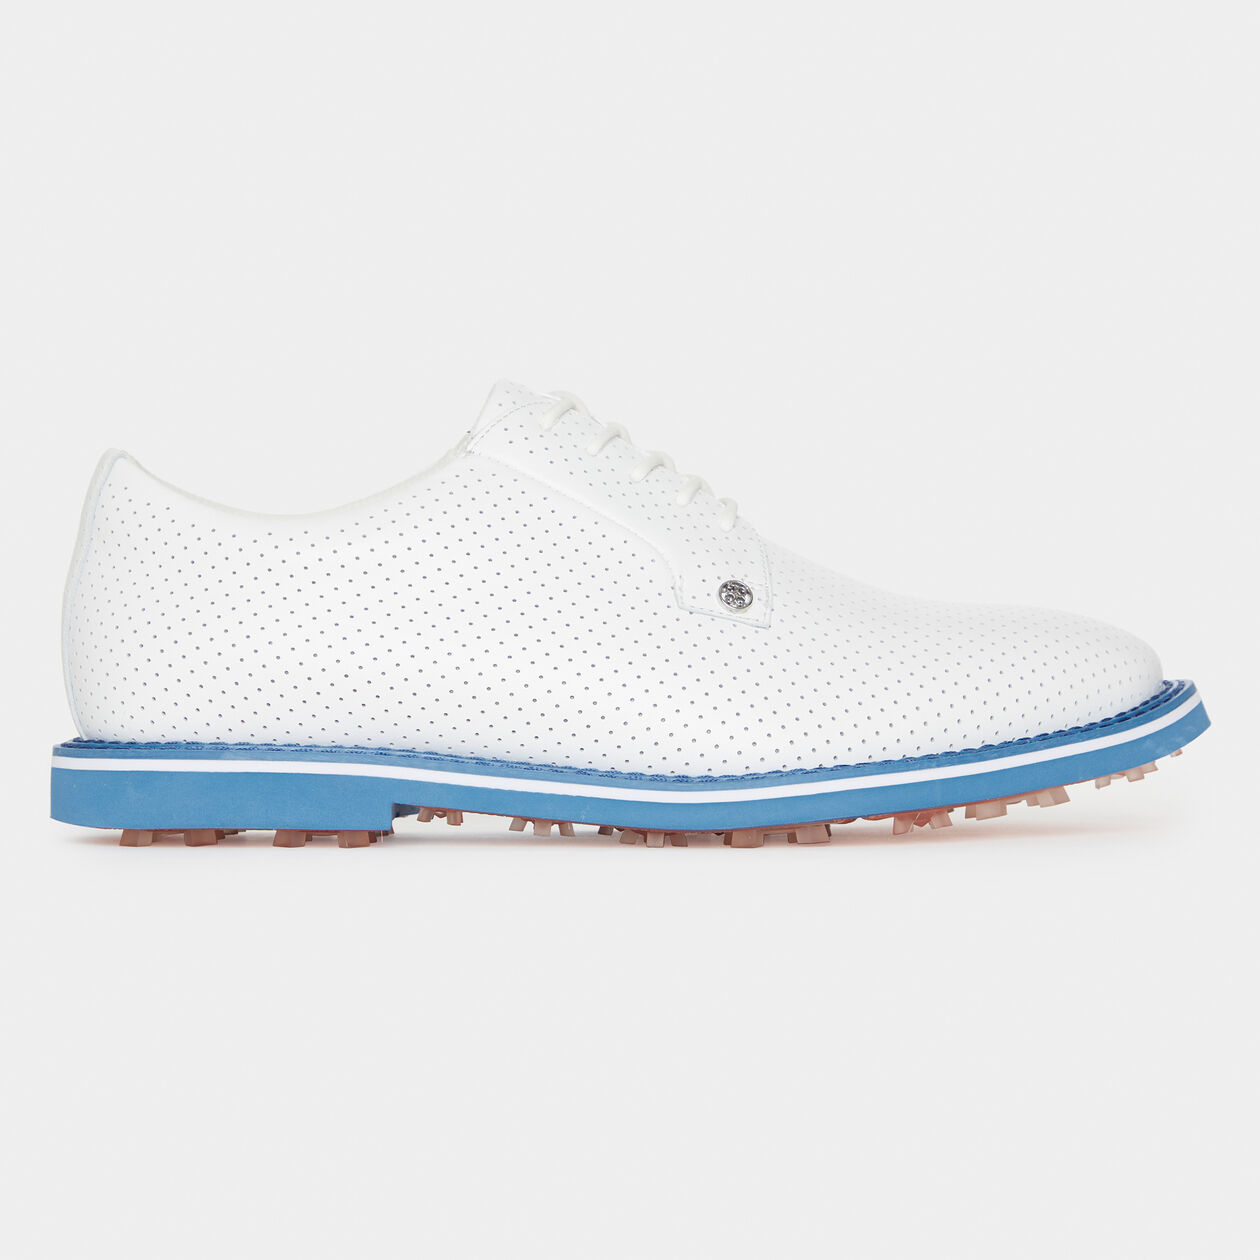 MEN'S GALLIVANTER PERFORATED LEATHER GOLF SHOE – G/FORE